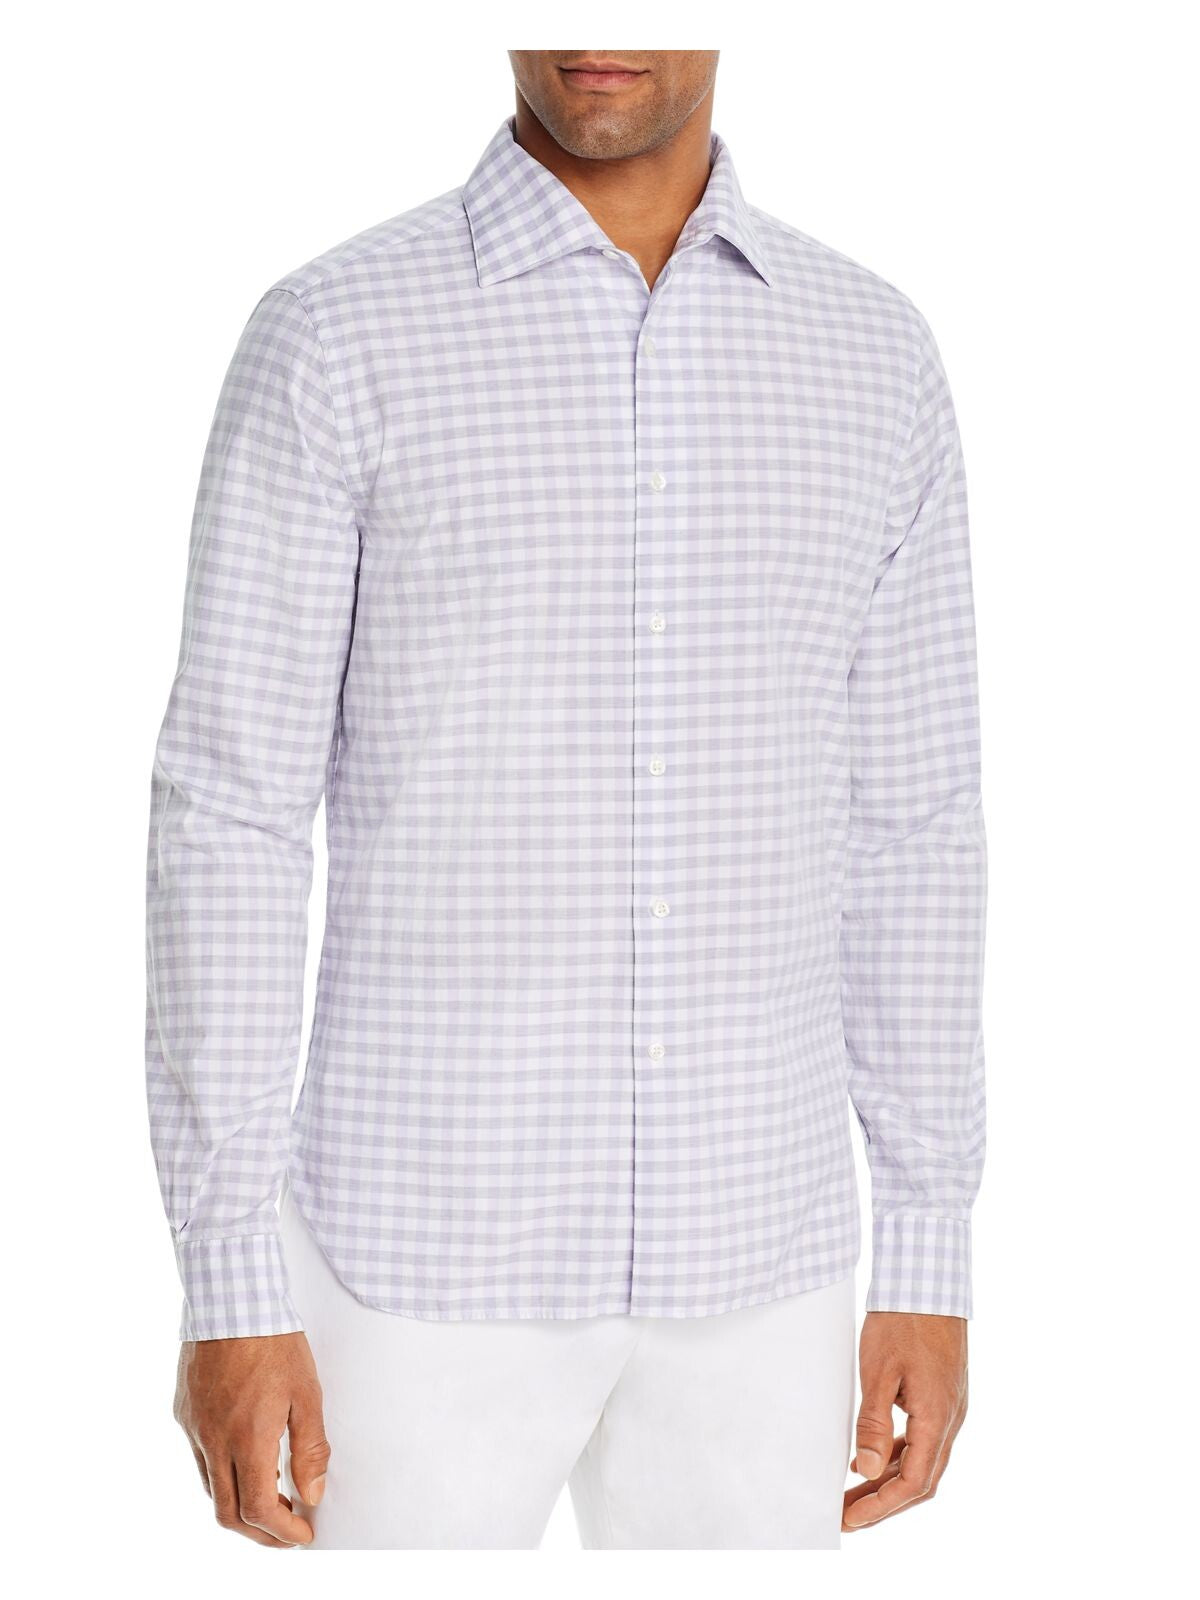 The Mens store Mens Purple Gingham Long Sleeve Classic Fit Button Down Casual Shirt 2XL